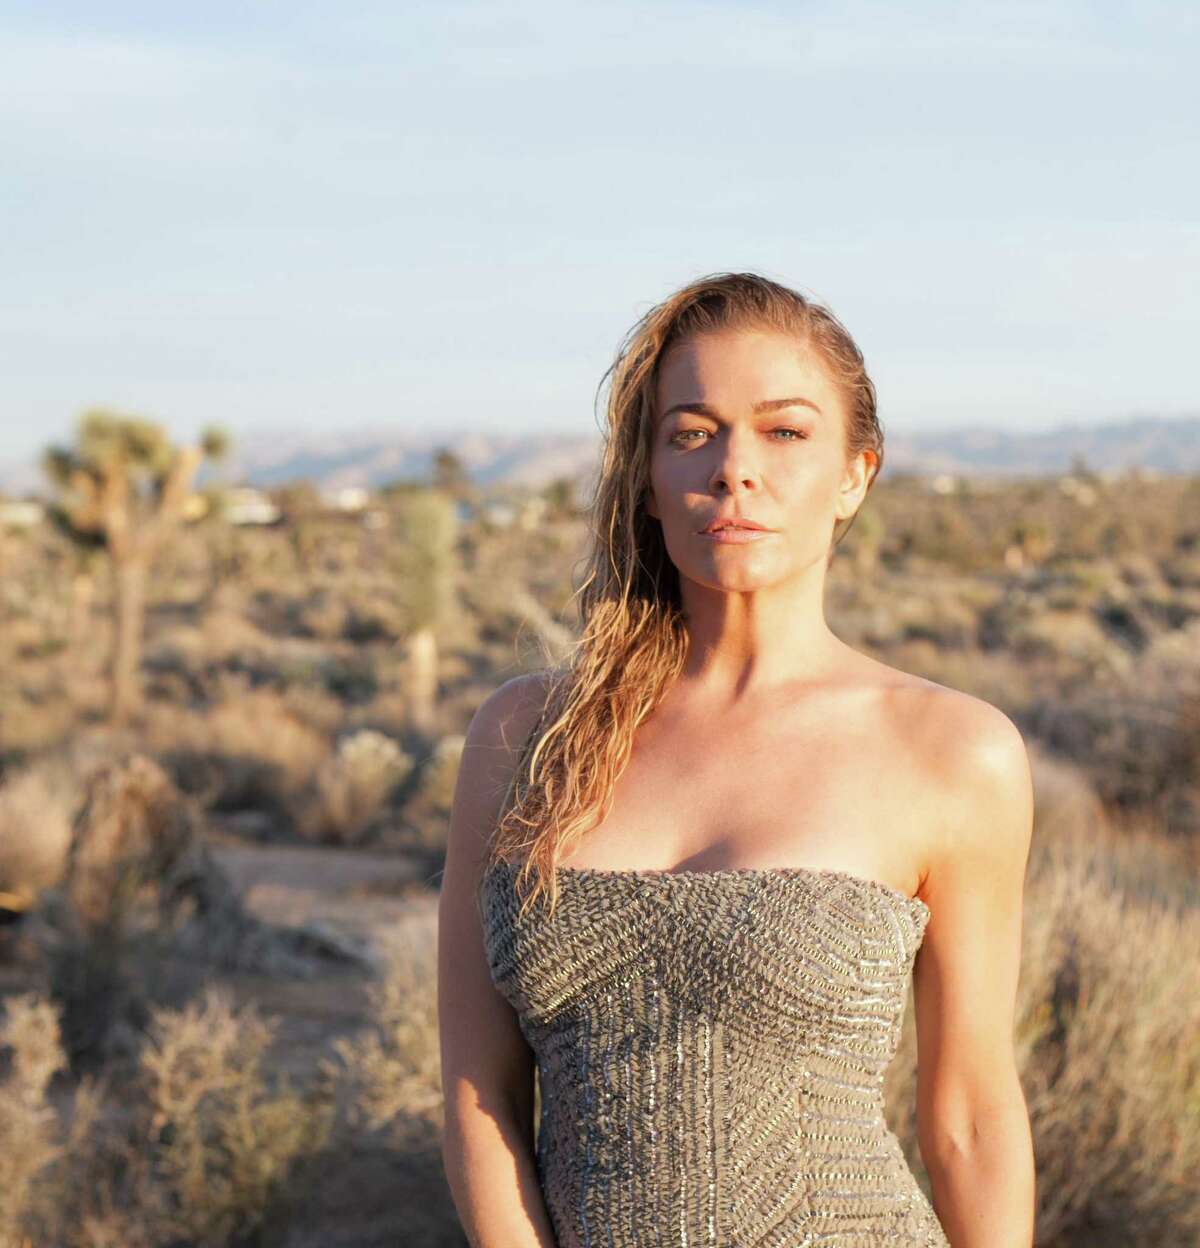 LeAnn Rimes will perform at Norwalk’s Wall Street Theater on Oct. 25.